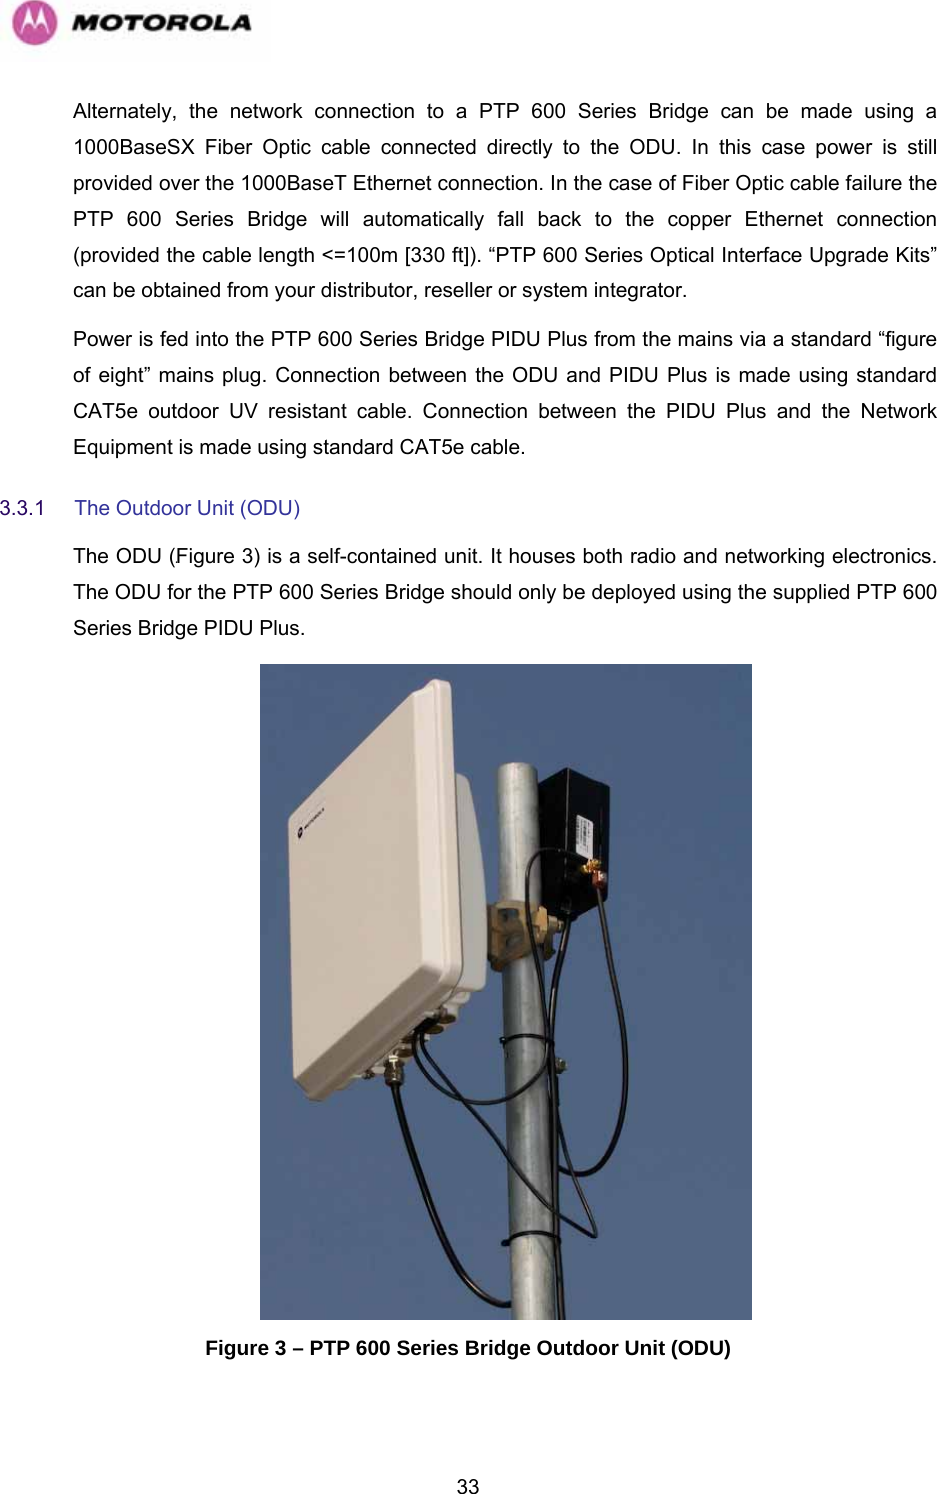   33Alternately, the network connection to a PTP 600 Series Bridge can be made using a 1000BaseSX Fiber Optic cable connected directly to the ODU. In this case power is still provided over the 1000BaseT Ethernet connection. In the case of Fiber Optic cable failure the PTP 600 Series Bridge will automatically fall back to the copper Ethernet connection (provided the cable length &lt;=100m [330 ft]). “PTP 600 Series Optical Interface Upgrade Kits” can be obtained from your distributor, reseller or system integrator. Power is fed into the PTP 600 Series Bridge PIDU Plus from the mains via a standard “figure of eight” mains plug. Connection between the ODU and PIDU Plus is made using standard CAT5e outdoor UV resistant cable. Connection between the PIDU Plus and the Network Equipment is made using standard CAT5e cable. 3.3.1  The Outdoor Unit (ODU) The ODU (966HFigure 3) is a self-contained unit. It houses both radio and networking electronics. The ODU for the PTP 600 Series Bridge should only be deployed using the supplied PTP 600 Series Bridge PIDU Plus.   Figure 3 – PTP 600 Series Bridge Outdoor Unit (ODU) 